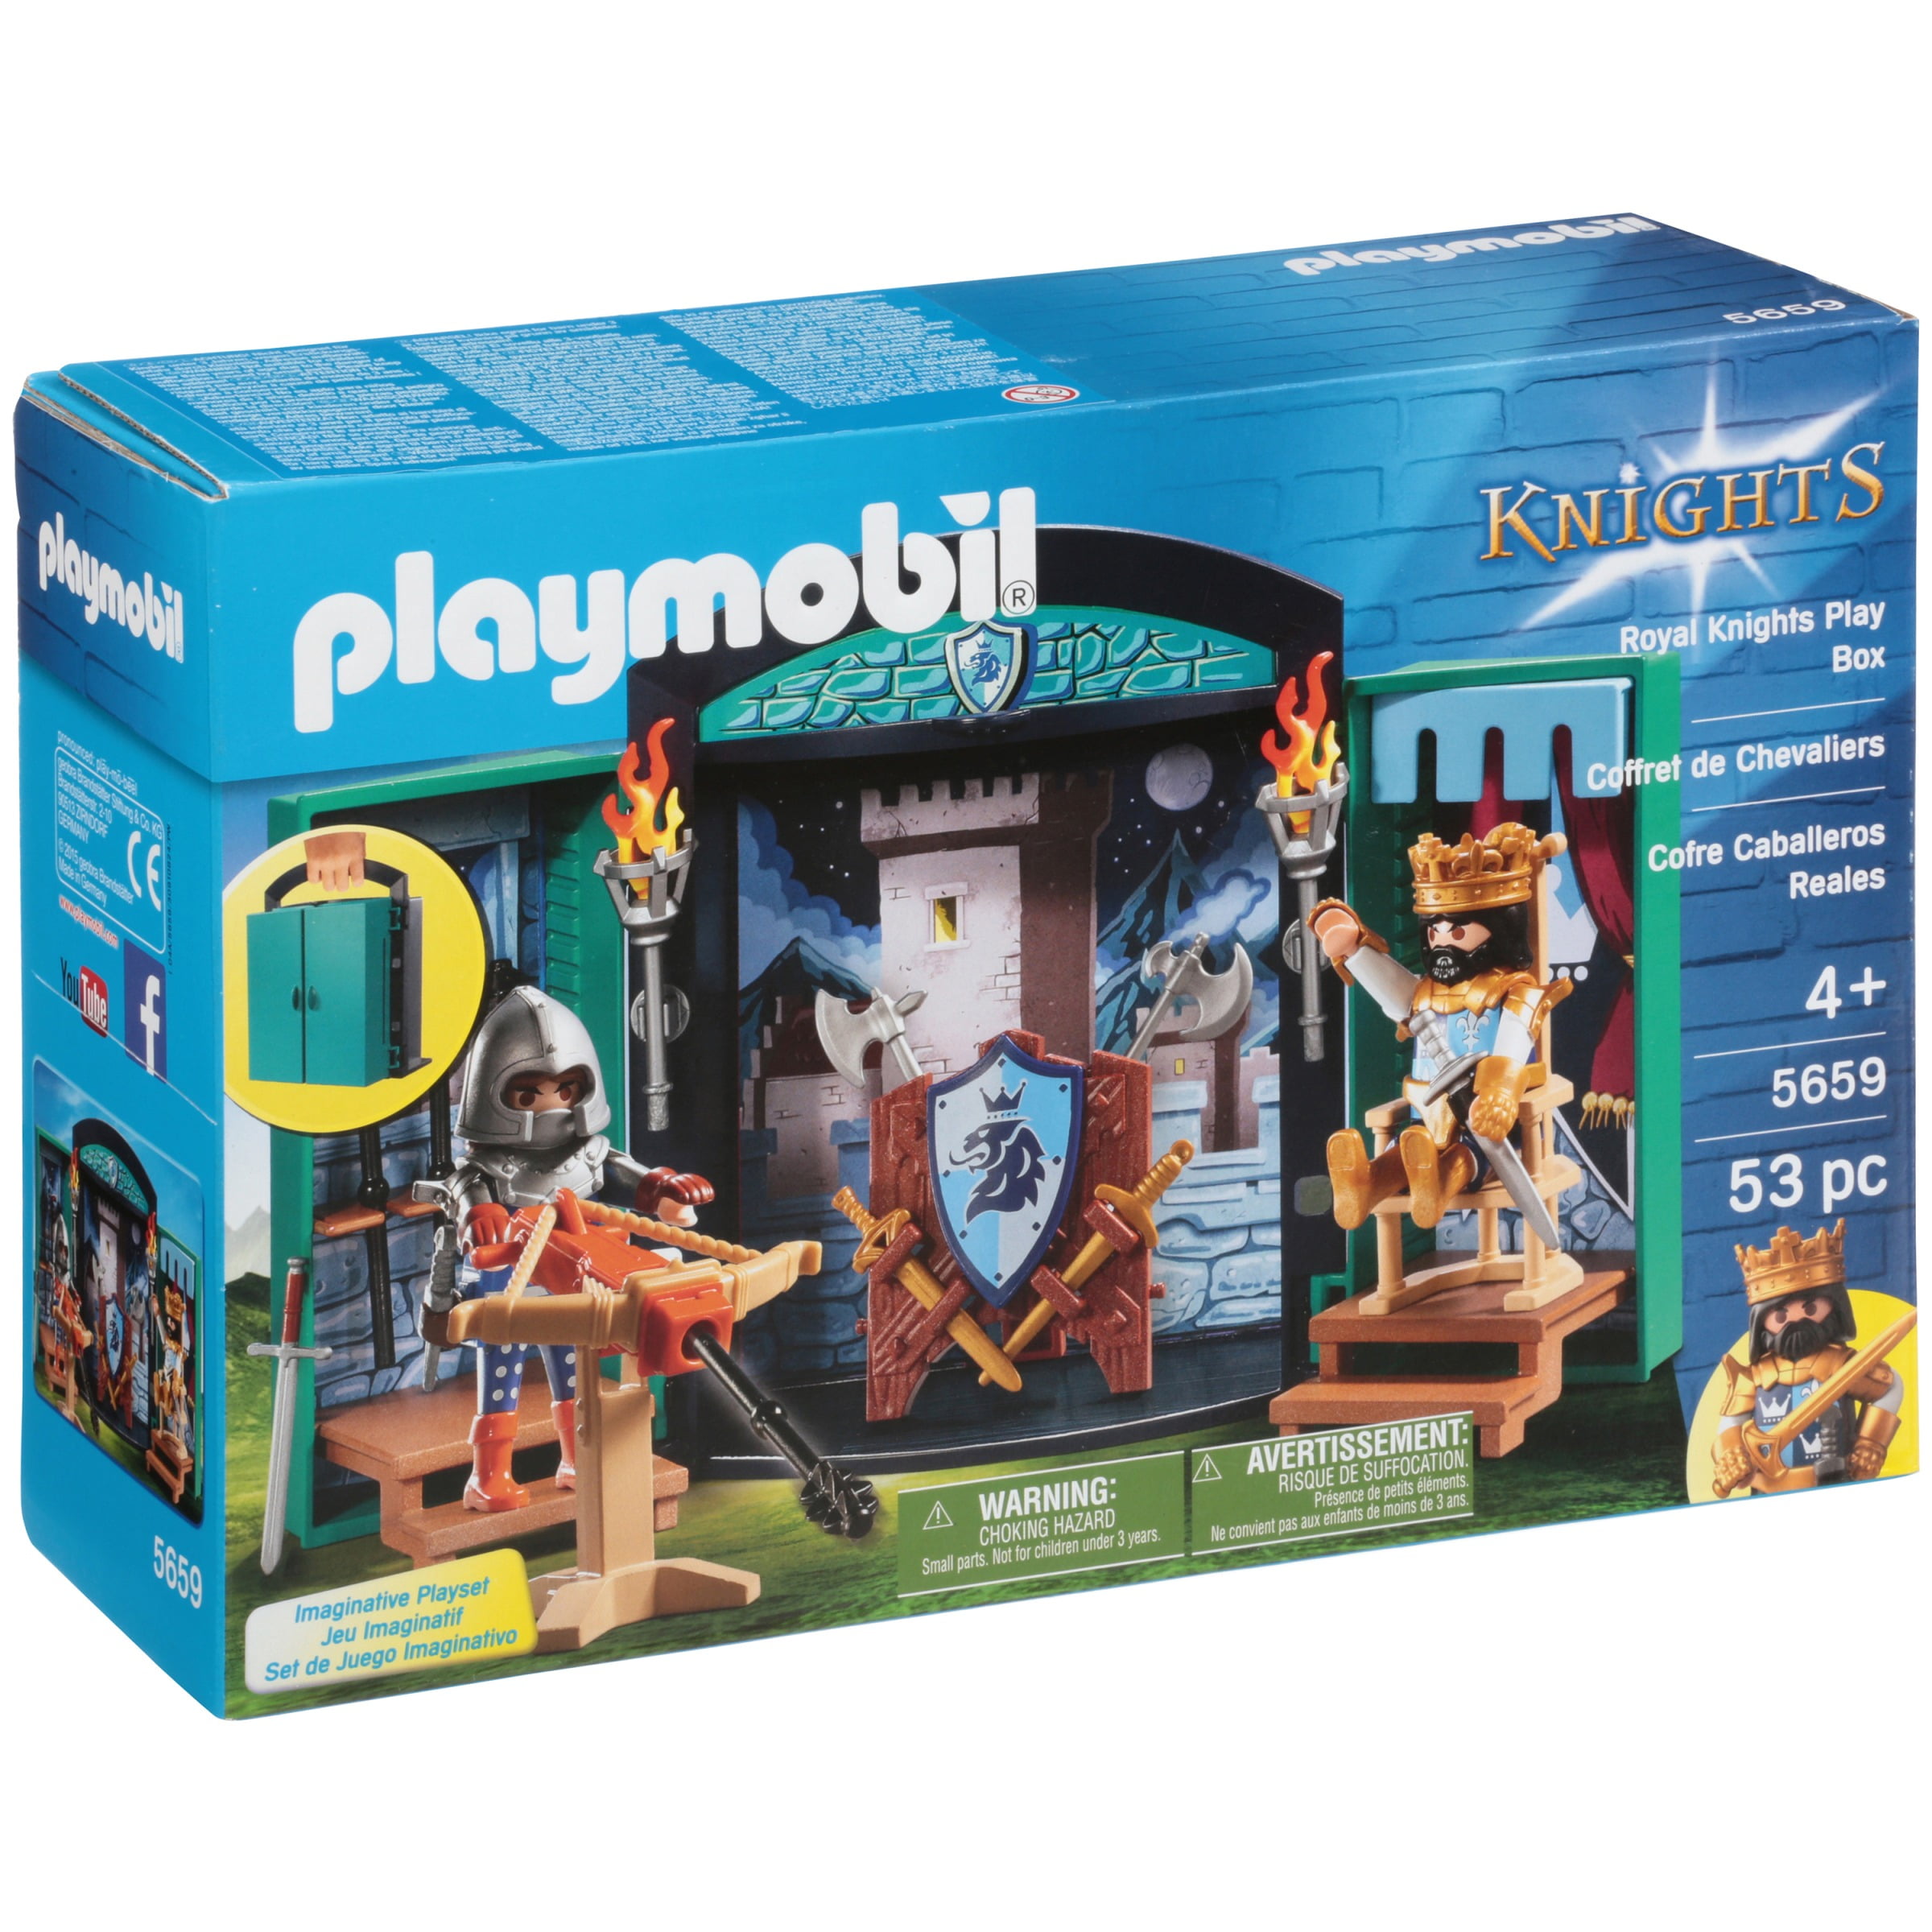 show original title to choose-new and original packaging Details about   Playmobil knights various set's 